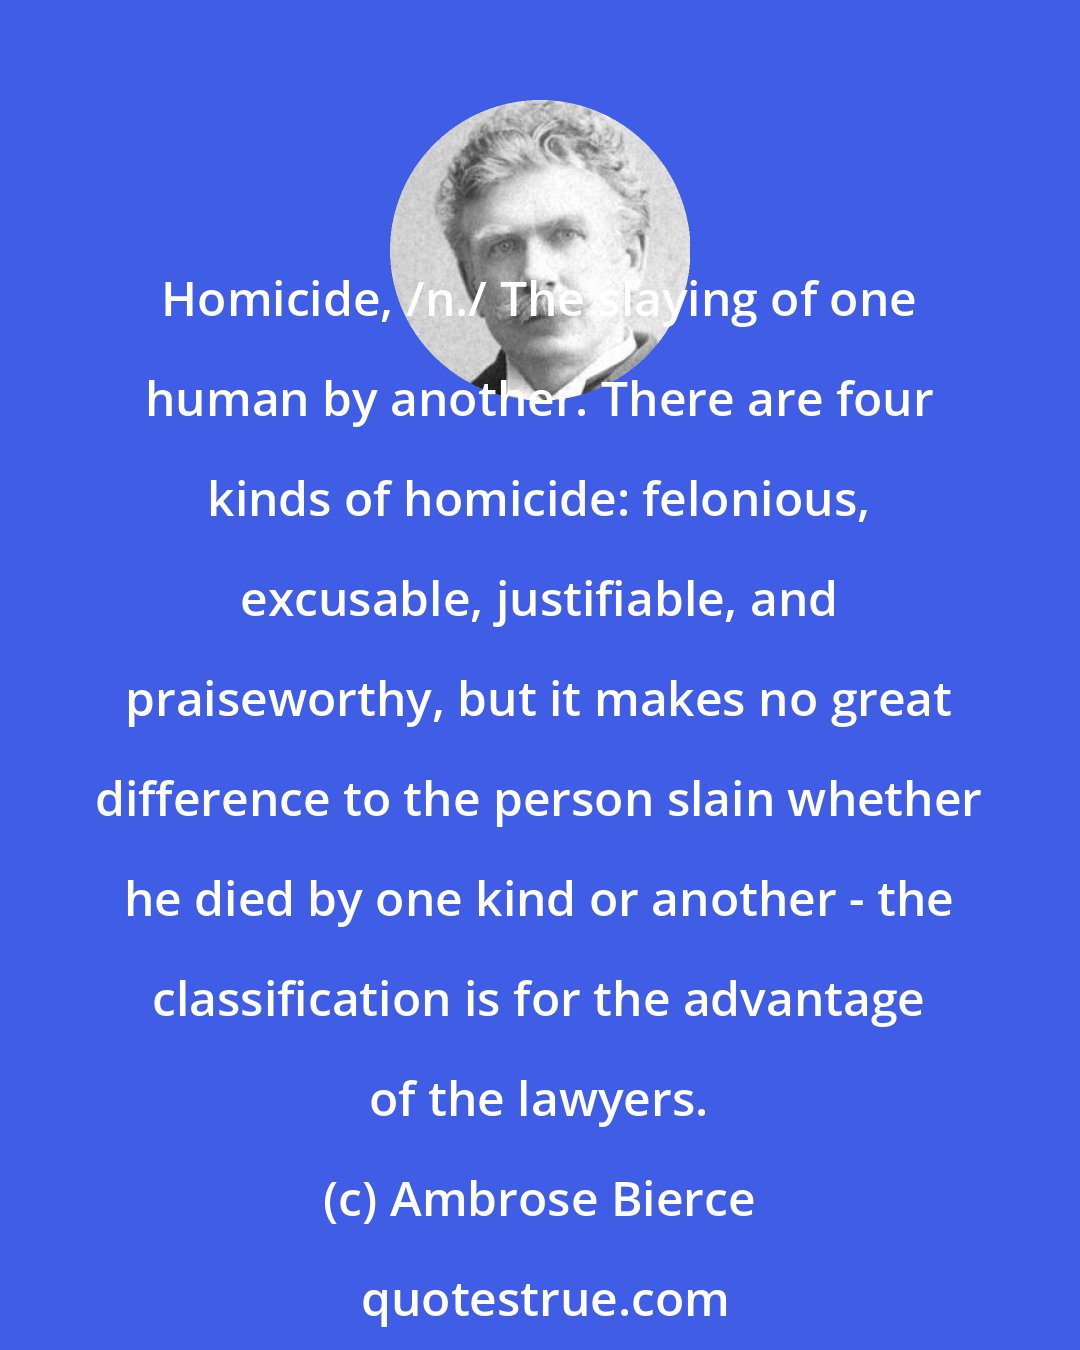 Ambrose Bierce: Homicide, /n./ The slaying of one human by another. There are four kinds of homicide: felonious, excusable, justifiable, and praiseworthy, but it makes no great difference to the person slain whether he died by one kind or another - the classification is for the advantage of the lawyers.